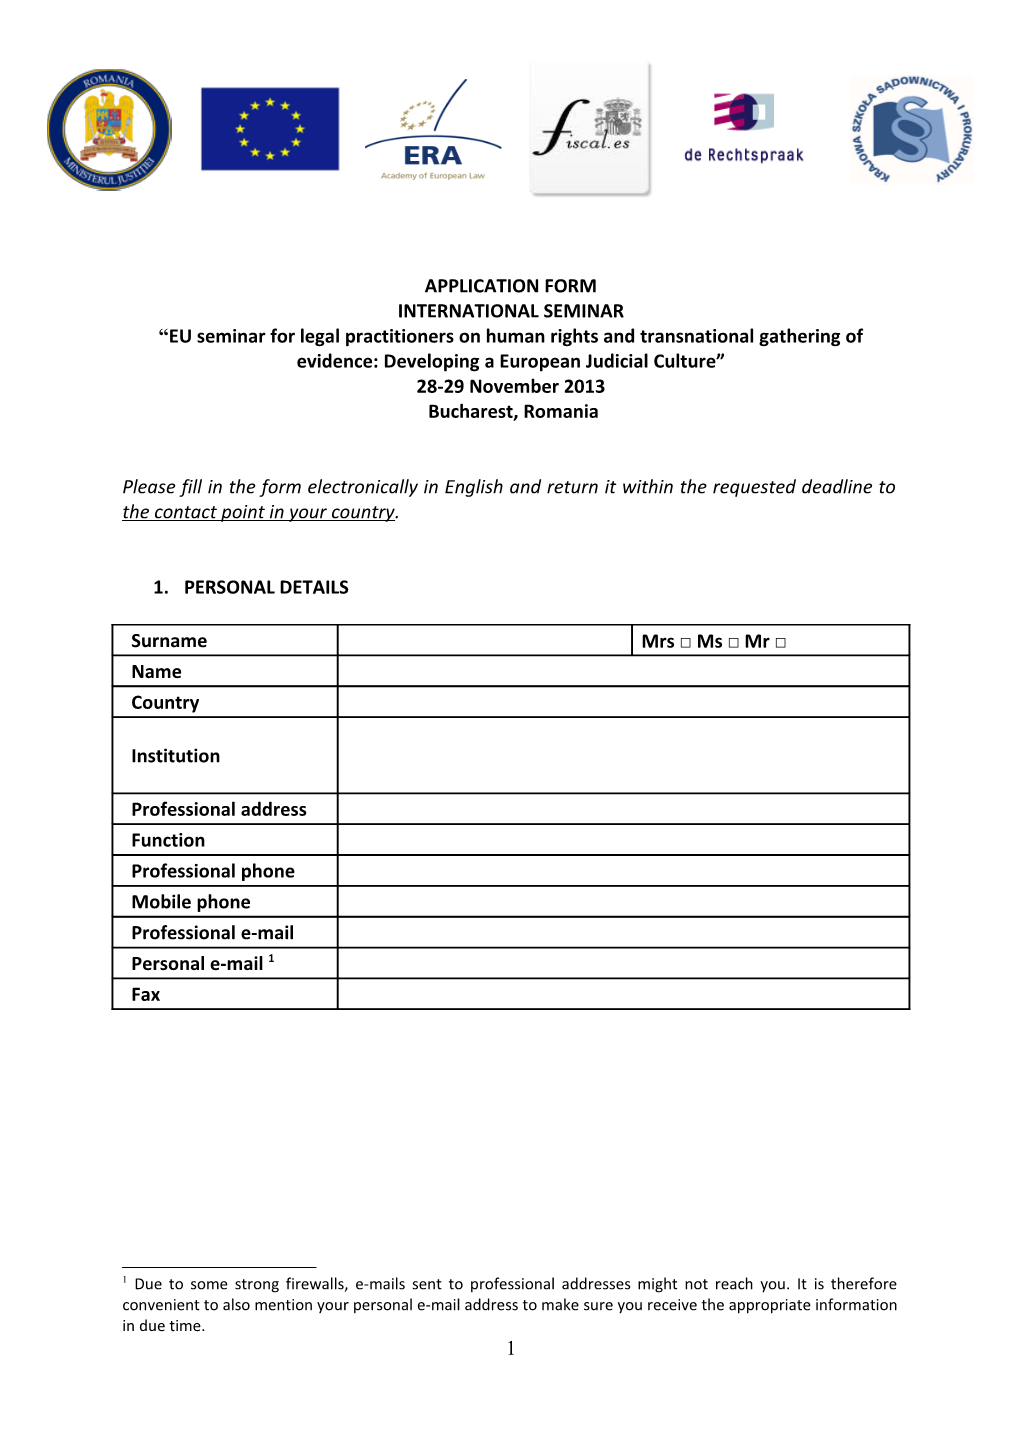 Application Form s13